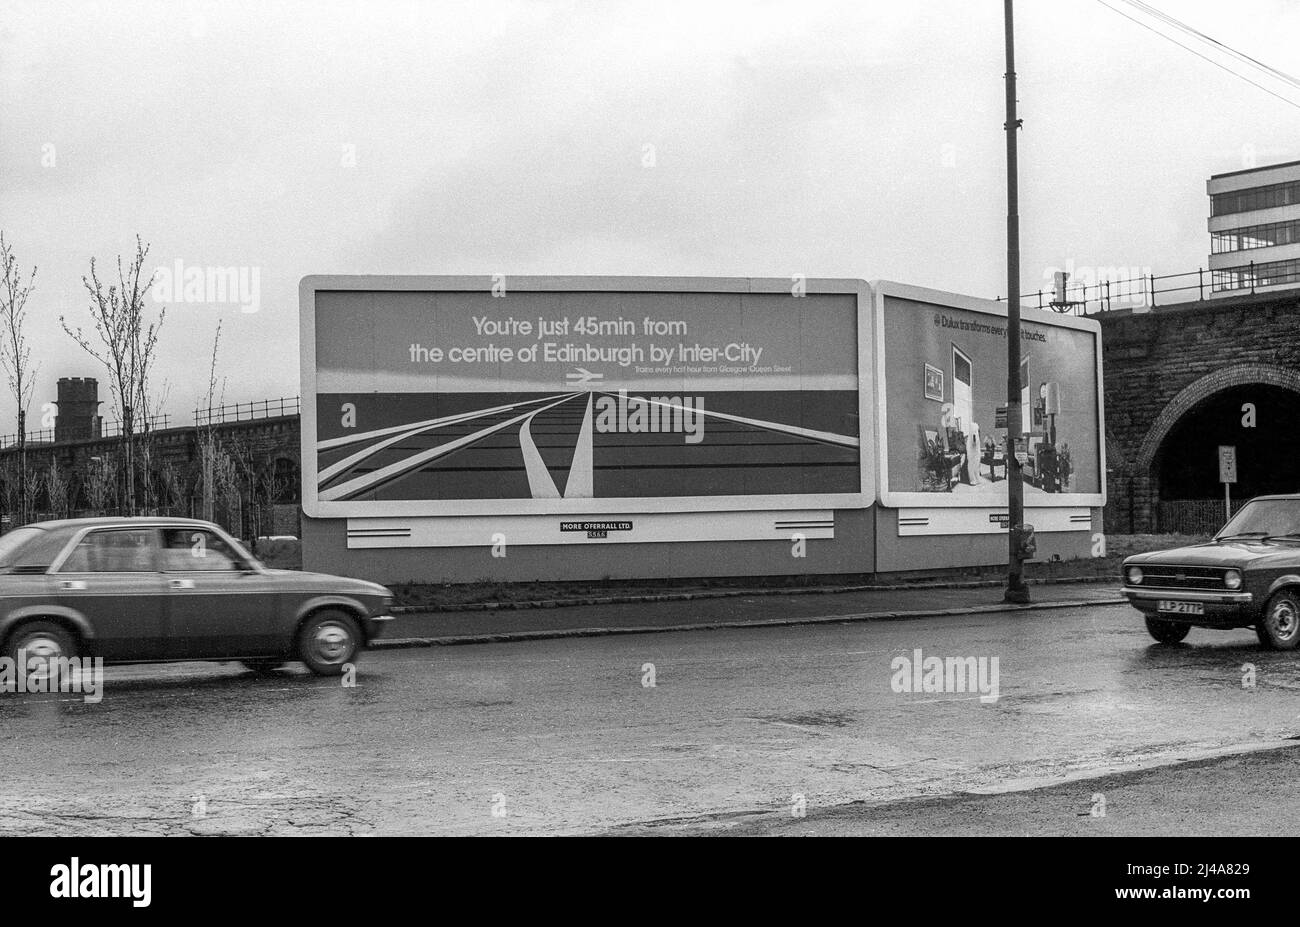 Archive photograph of British Rail inter-city railway poster in Glasgow, advertising that you could be in Edinburgh in 45 minutes.  Image is scan of original b&w negative taken in March 1977. Stock Photo